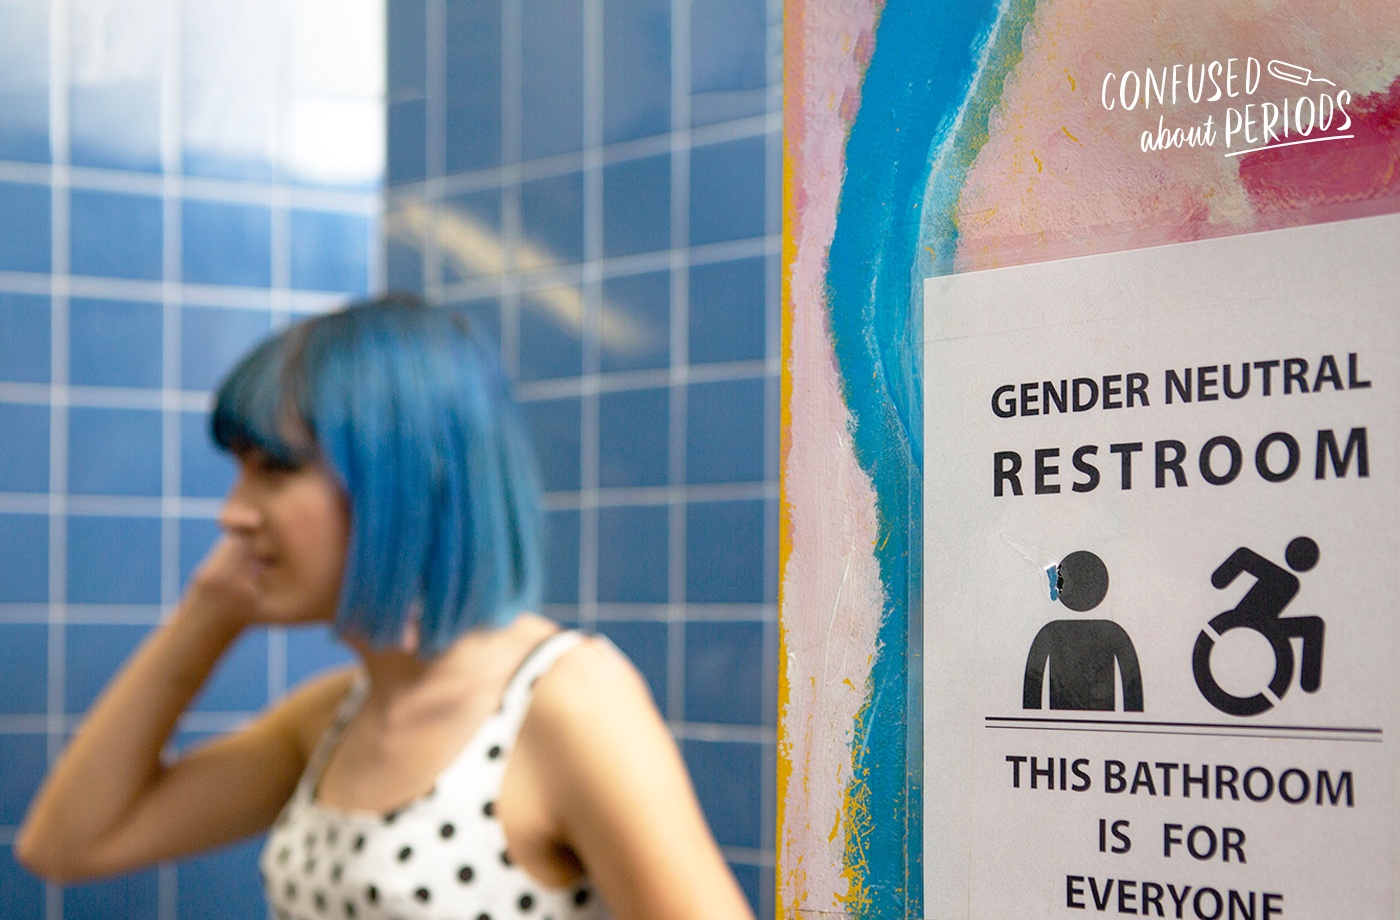 periods transgender community non-binary femme woman going to gender inclusive bathroom